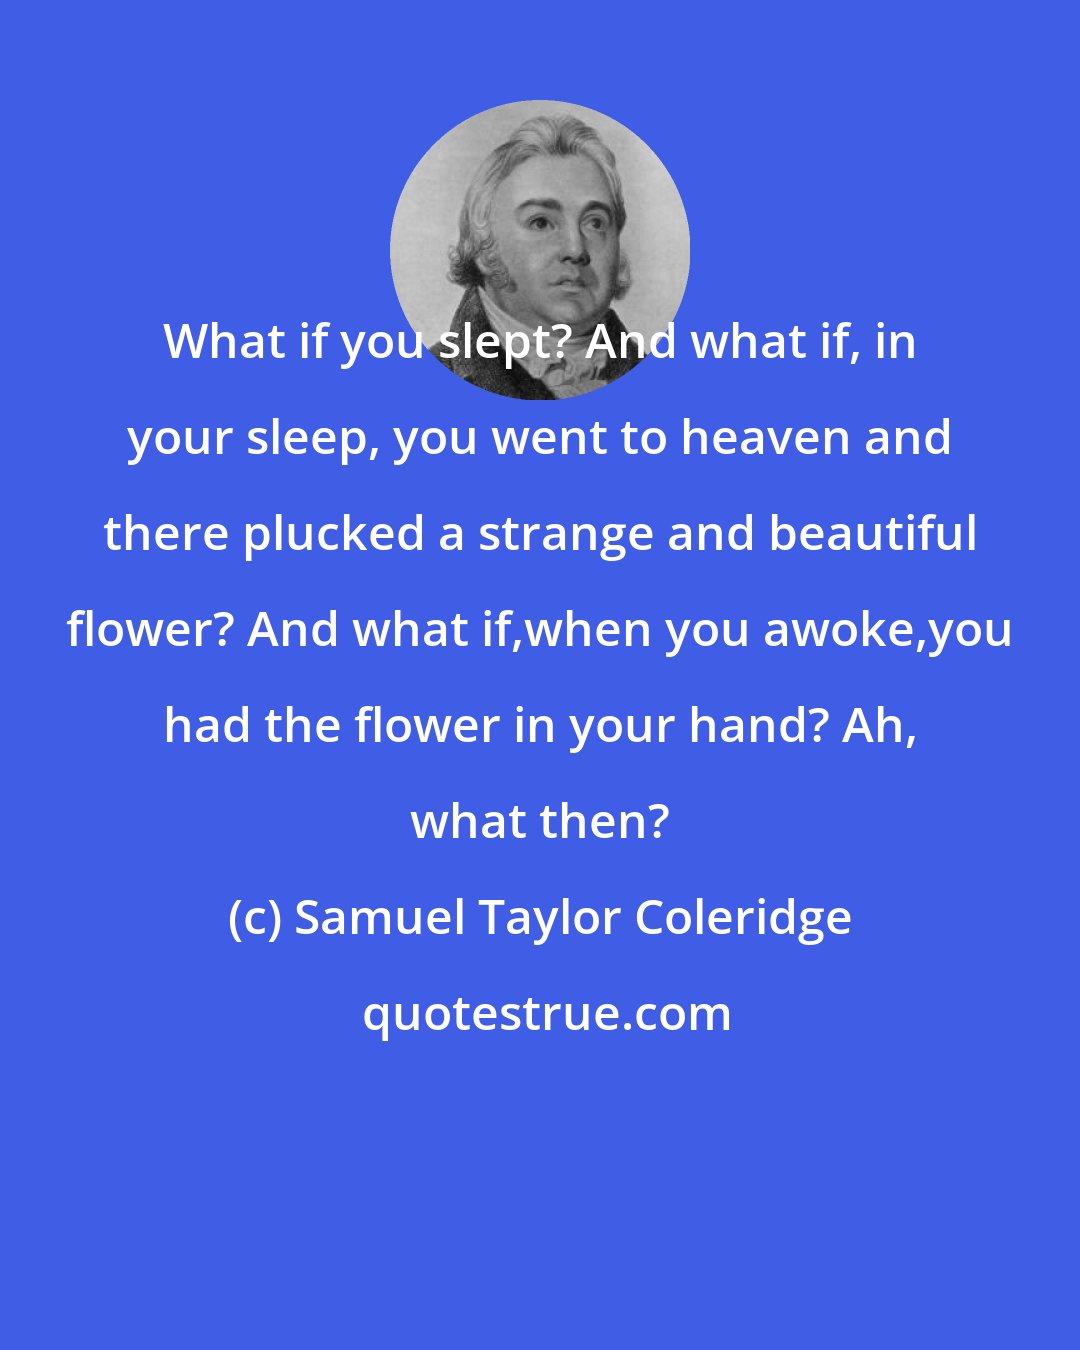 Samuel Taylor Coleridge: What if you slept? And what if, in your sleep, you went to heaven and there plucked a strange and beautiful flower? And what if,when you awoke,you had the flower in your hand? Ah, what then?